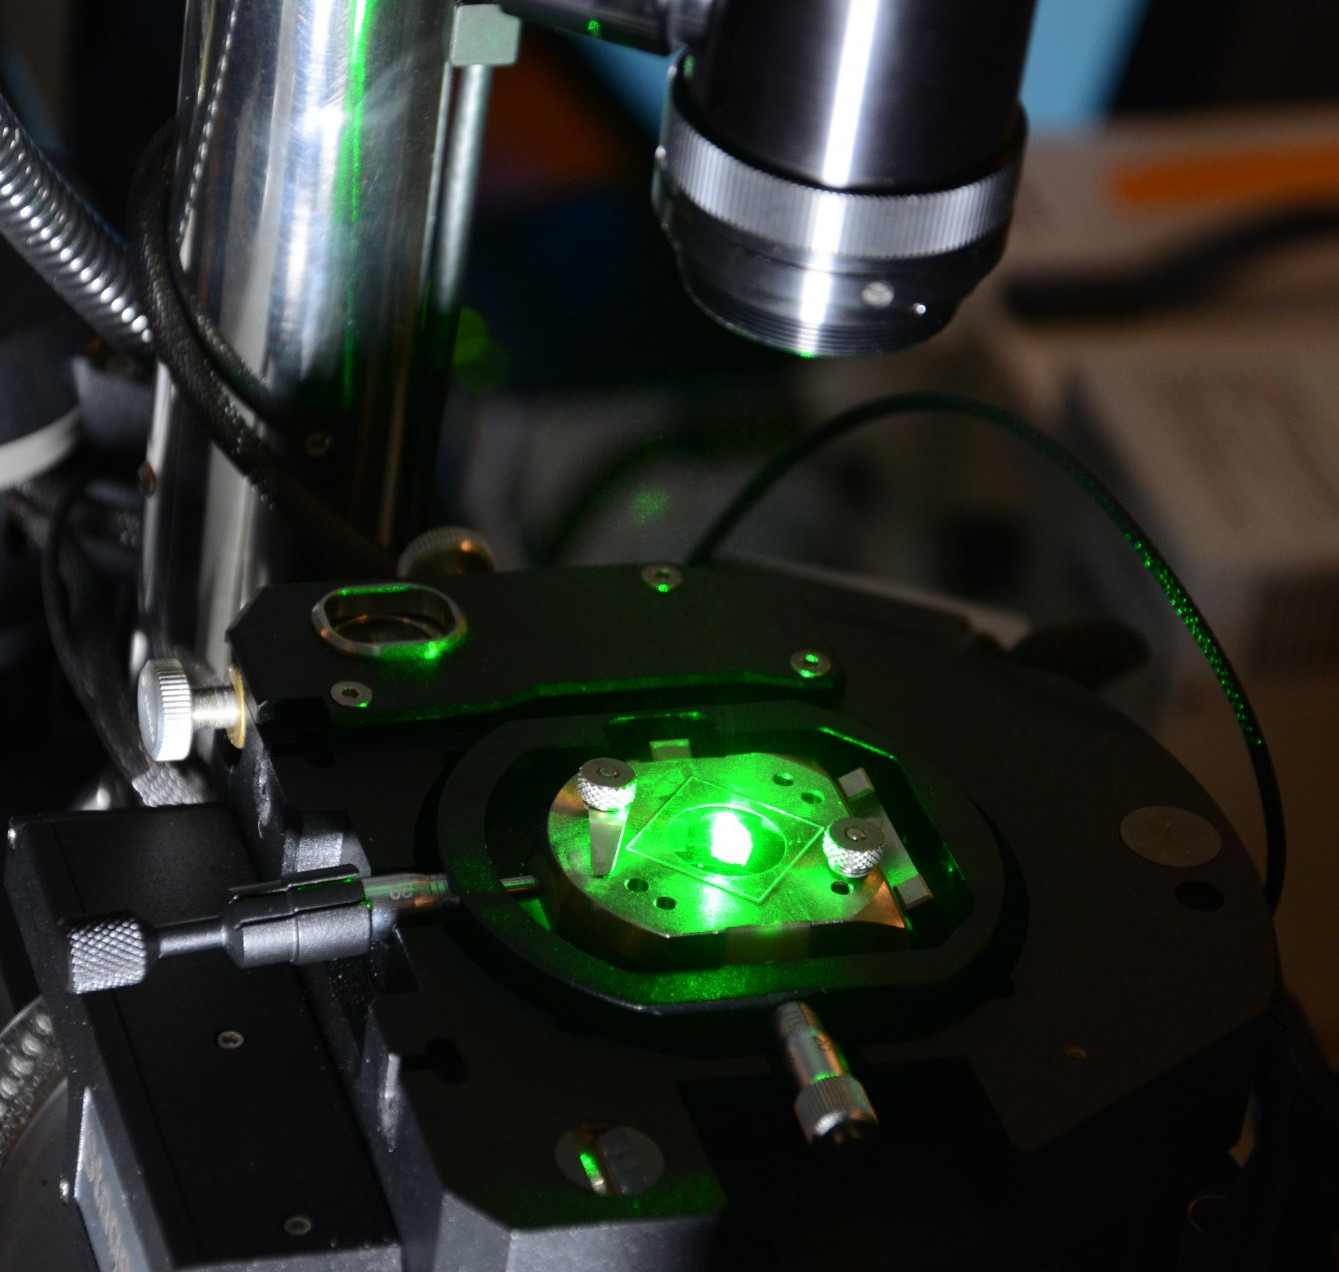 The laser of the Raman spectrometer. (© Max Planck Institute for Marine Microbiology)